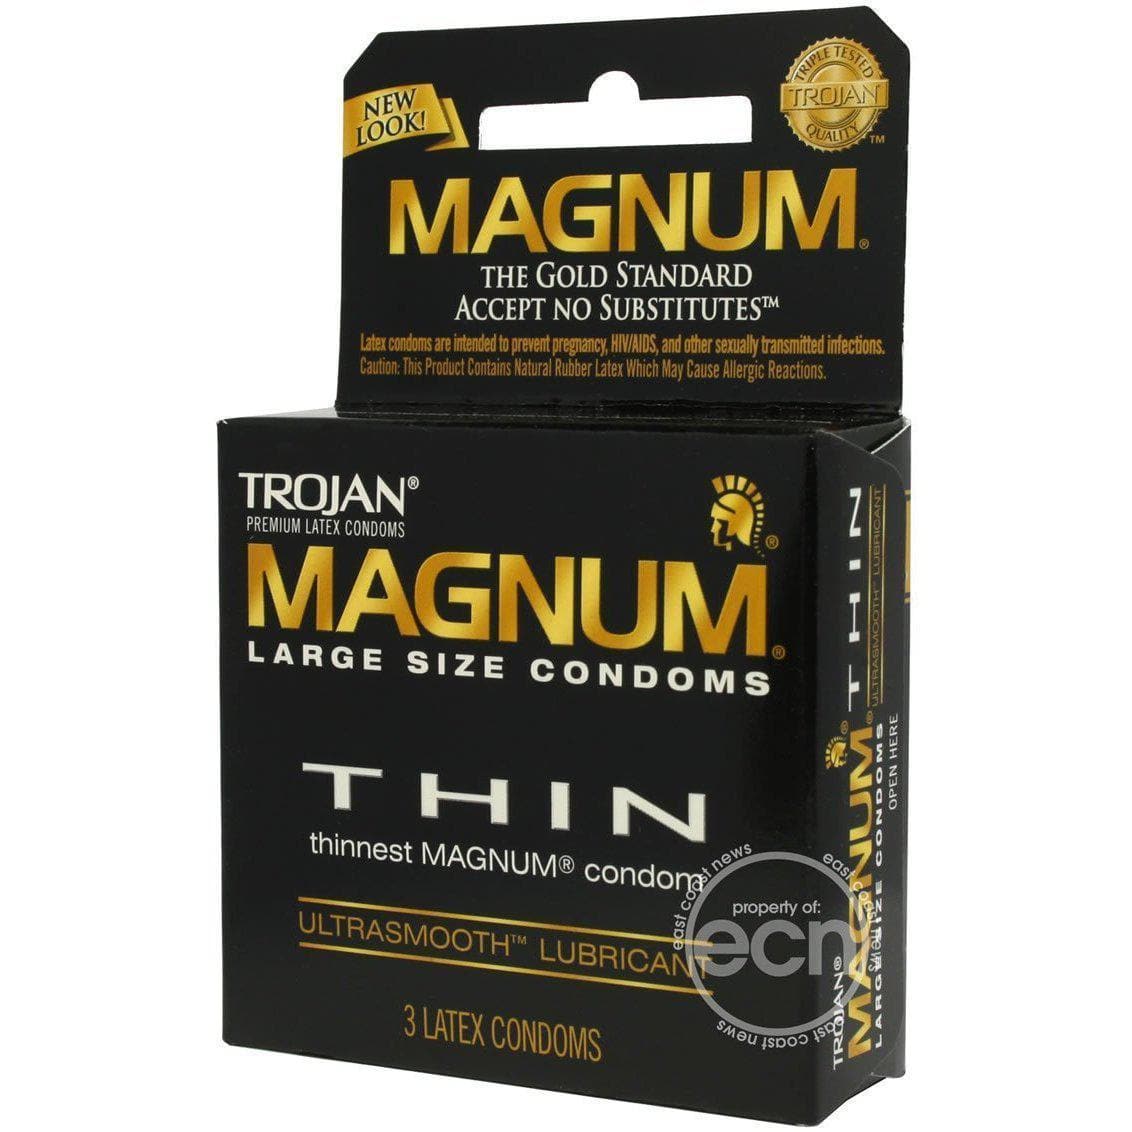 Trojan Condom Magnum Thin Large Size Lubricated 3 Pack - Romantic Blessings